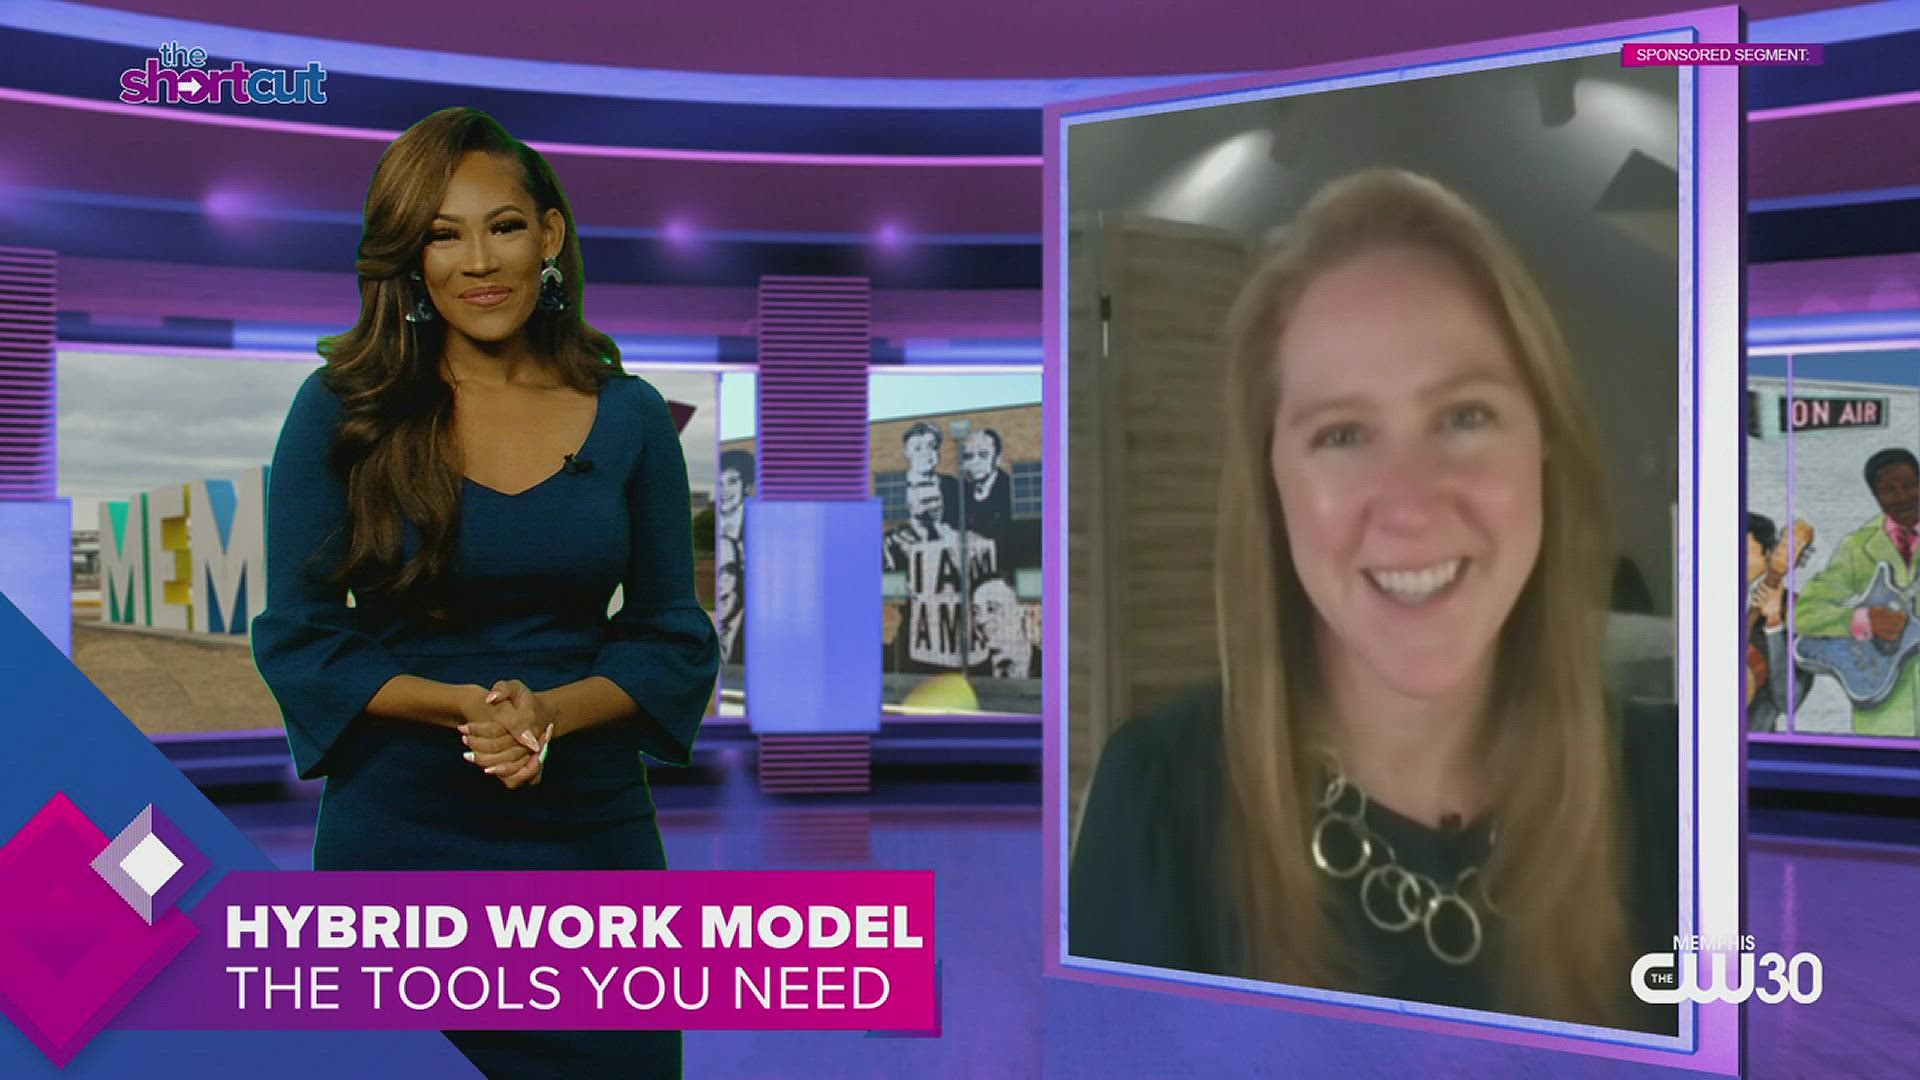 Whether you're a business owner or someone struggling to work from home, join Sydney Neely and Staples's Amy Lang for tips and tools on how to stay work-focused.